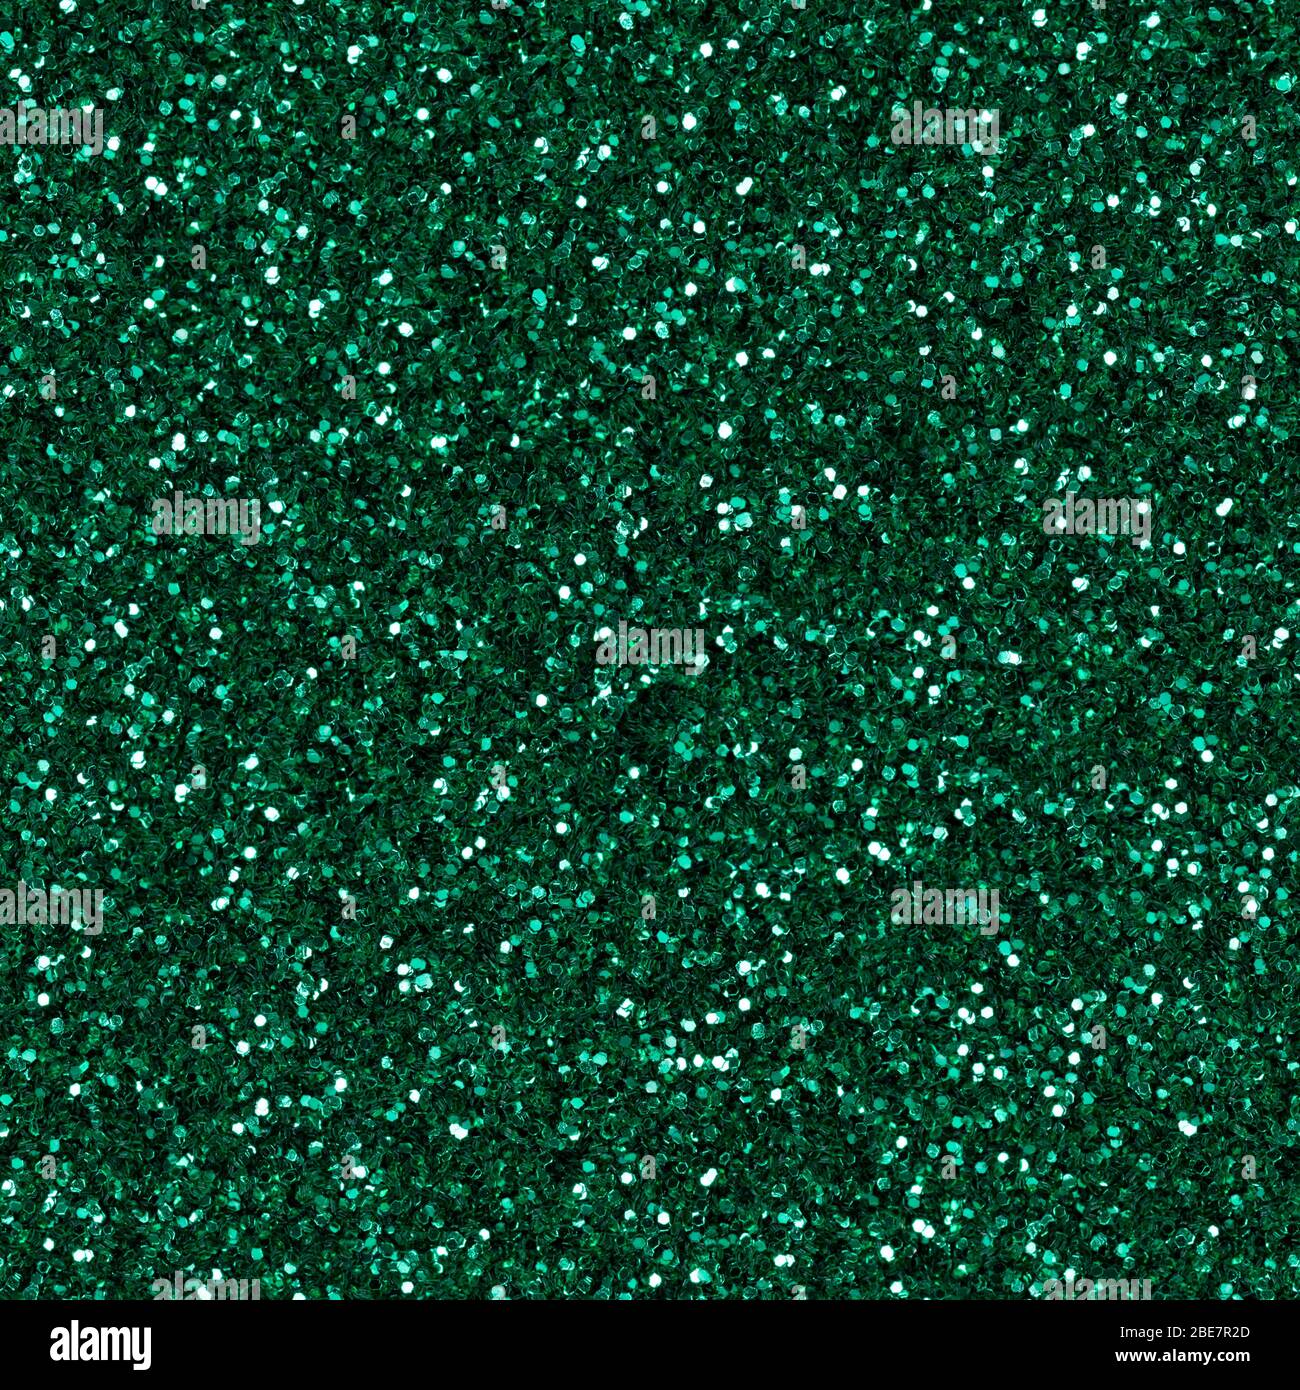 Elegant, contrast green glitter, sparkle confetti texture. Christmas abstract background, seamless pattern. Stock Photo